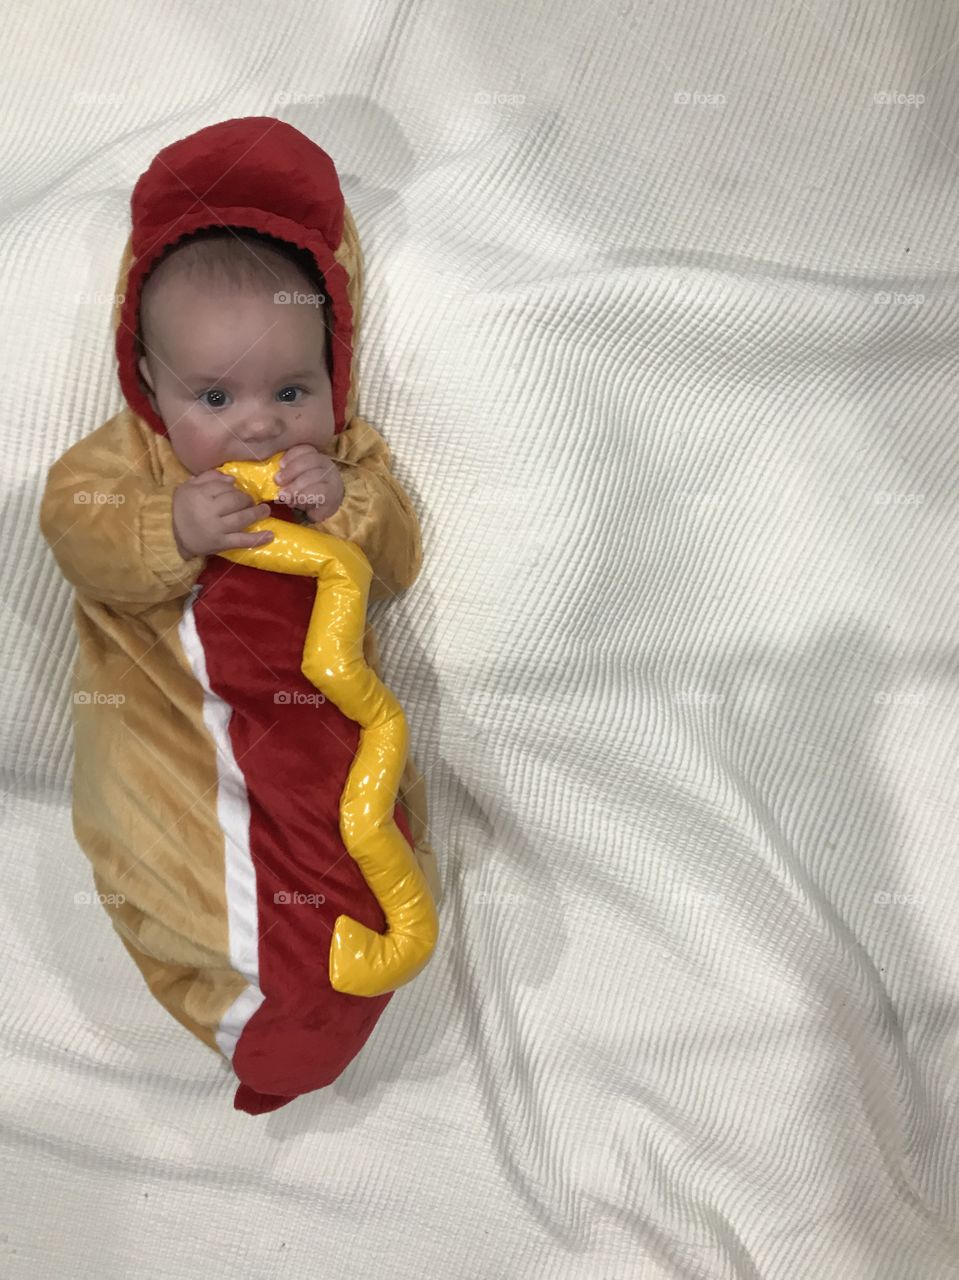 Adorable baby boy in his Halloween hot dog costume.